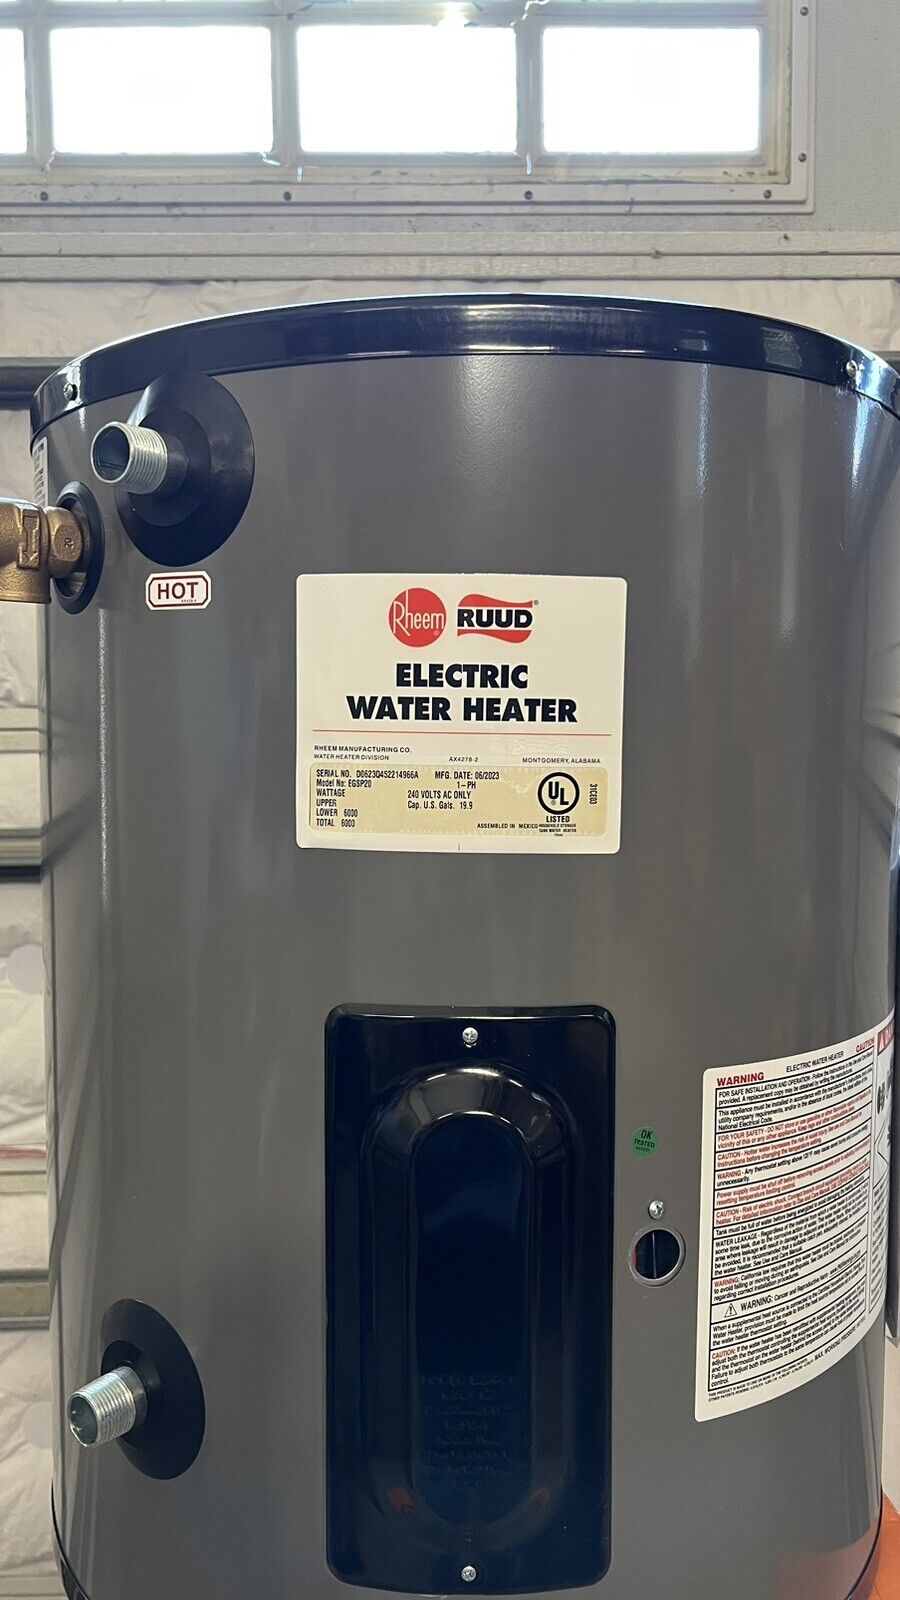 Rheem Ruud Commercial Electric Water Heater 240V 19.9 gal Single Phase EGSP20